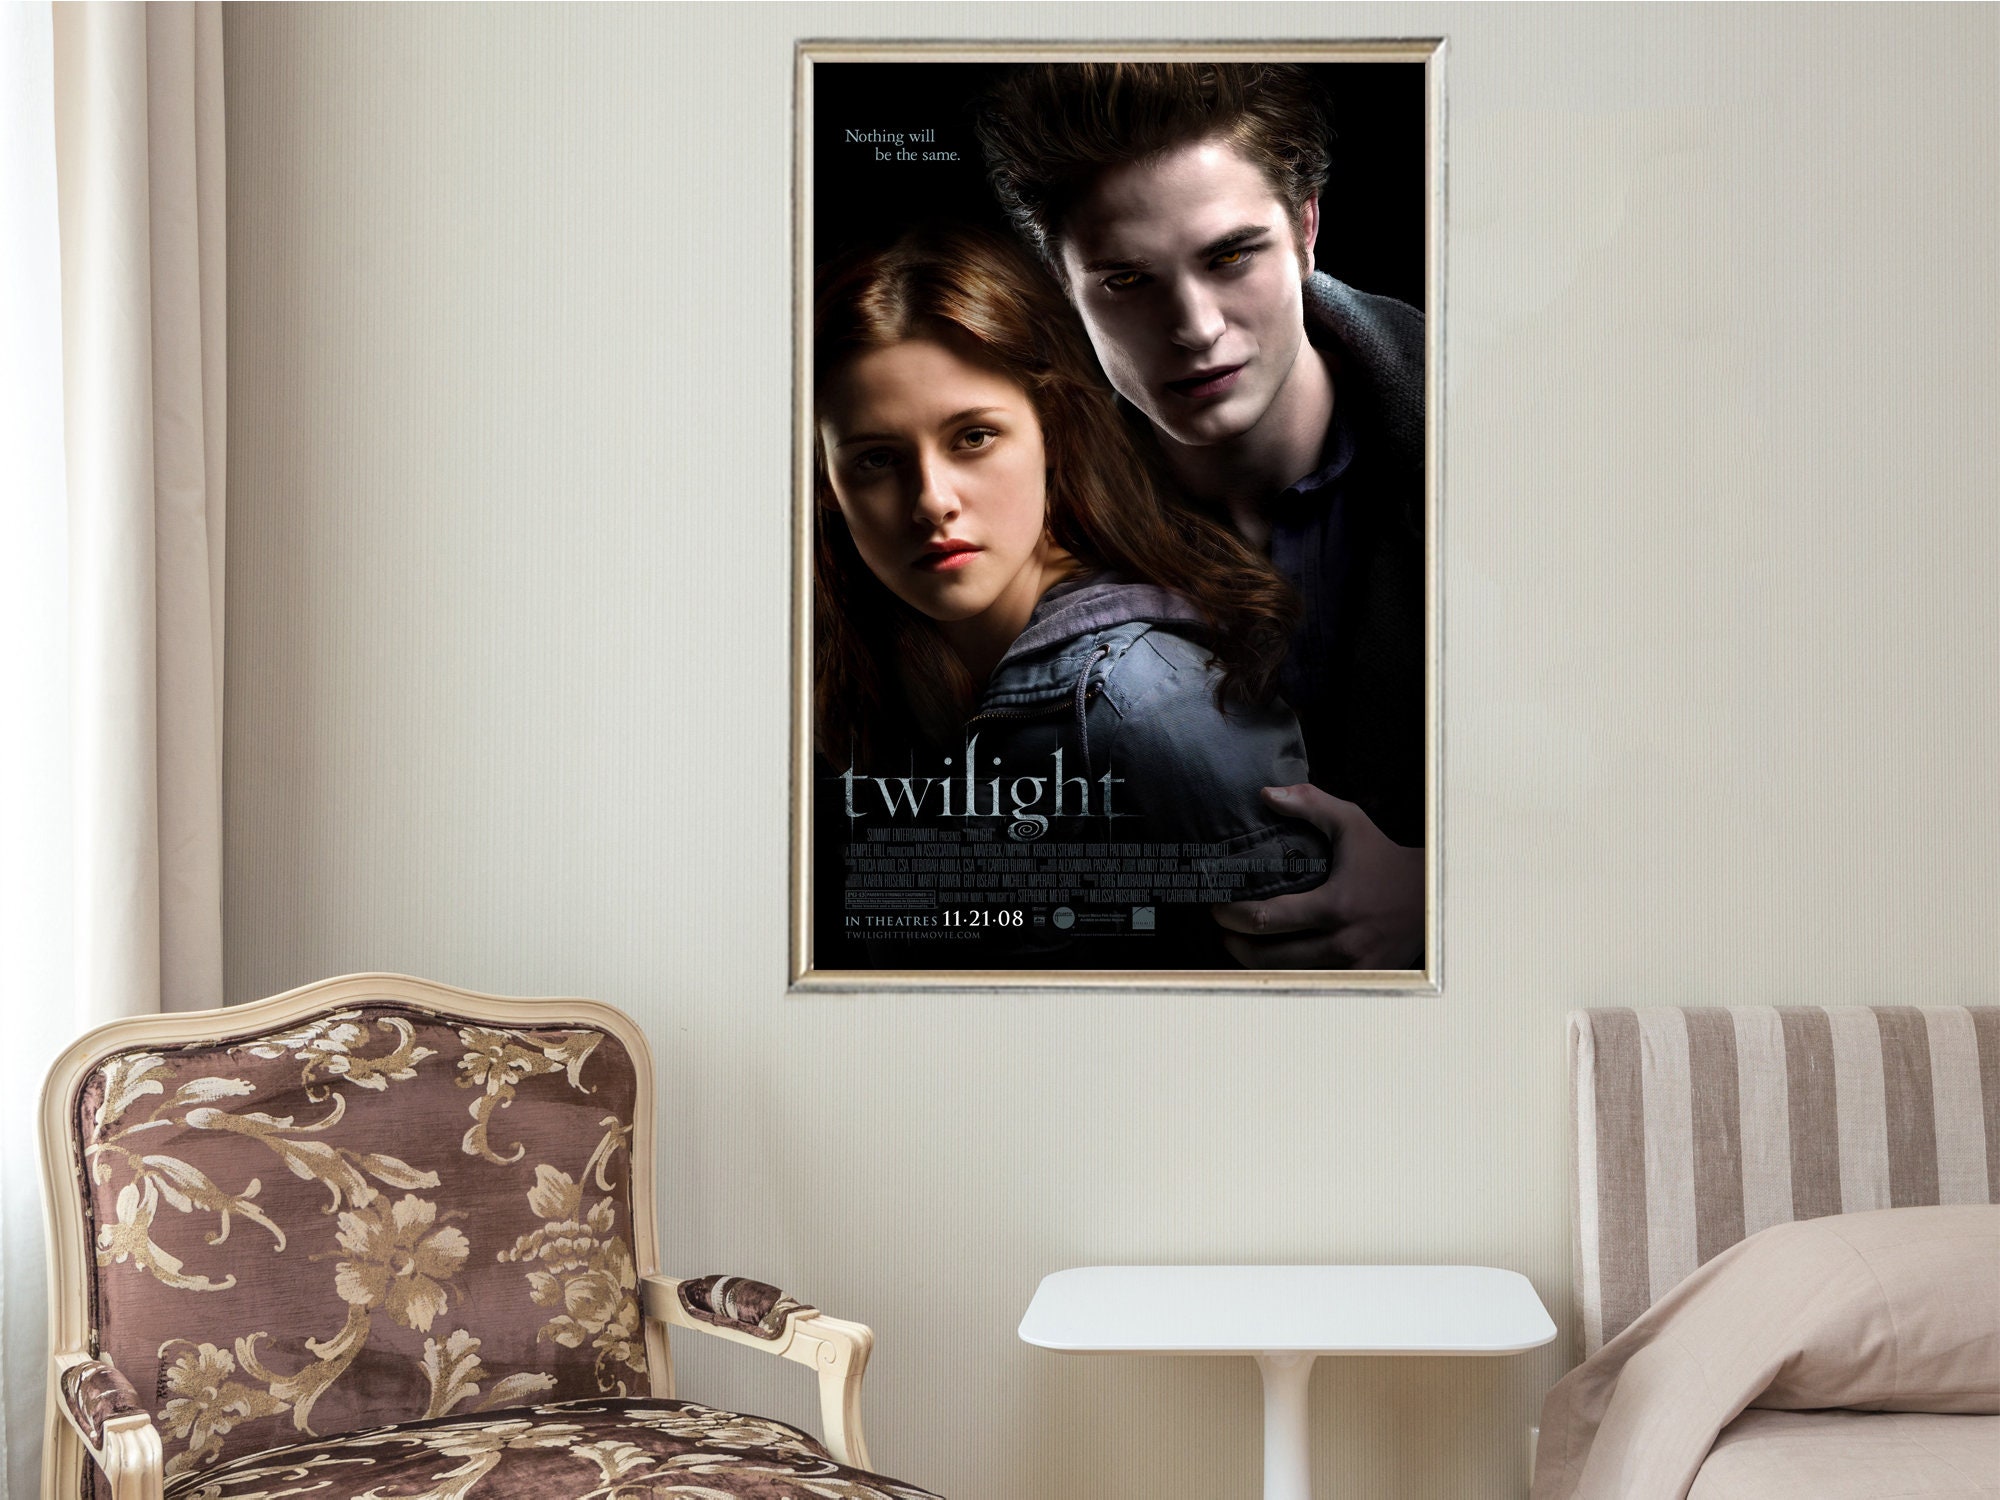 Twilight - Movie Posters - Movie Collectibles